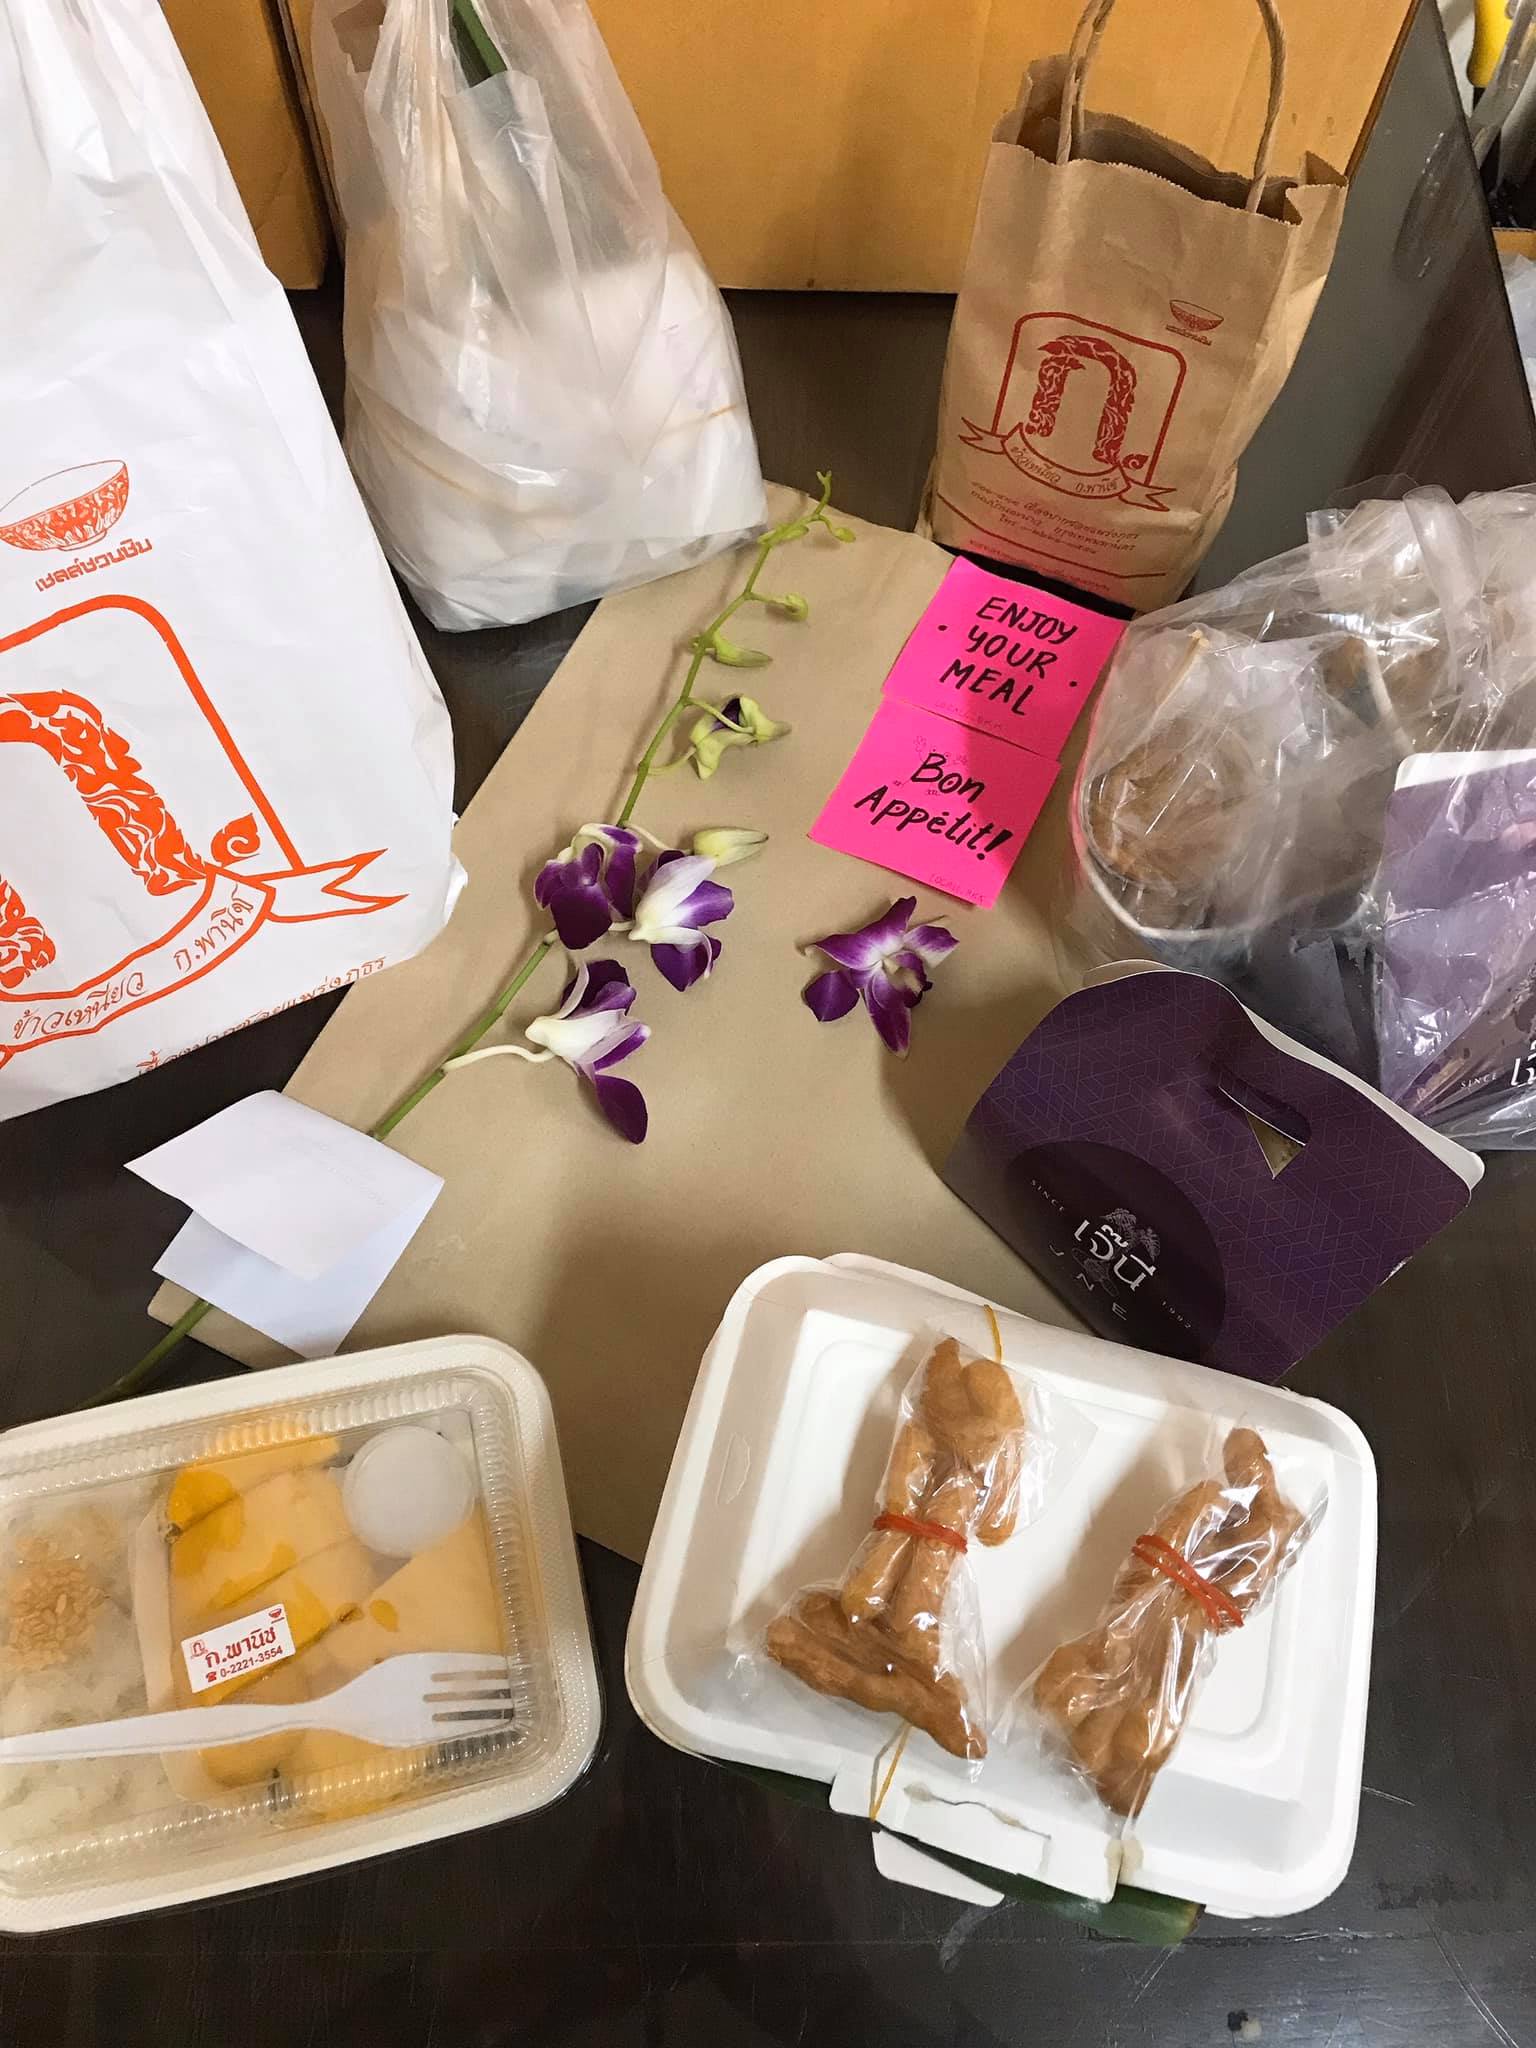 ‘Today I ordered Locall.bkk again and I got a flower and a lovely Happy-New-Year note,’ wrote Facebook user Gift Mongkolratna. Photo: Gift Mongkolratna / Facebook